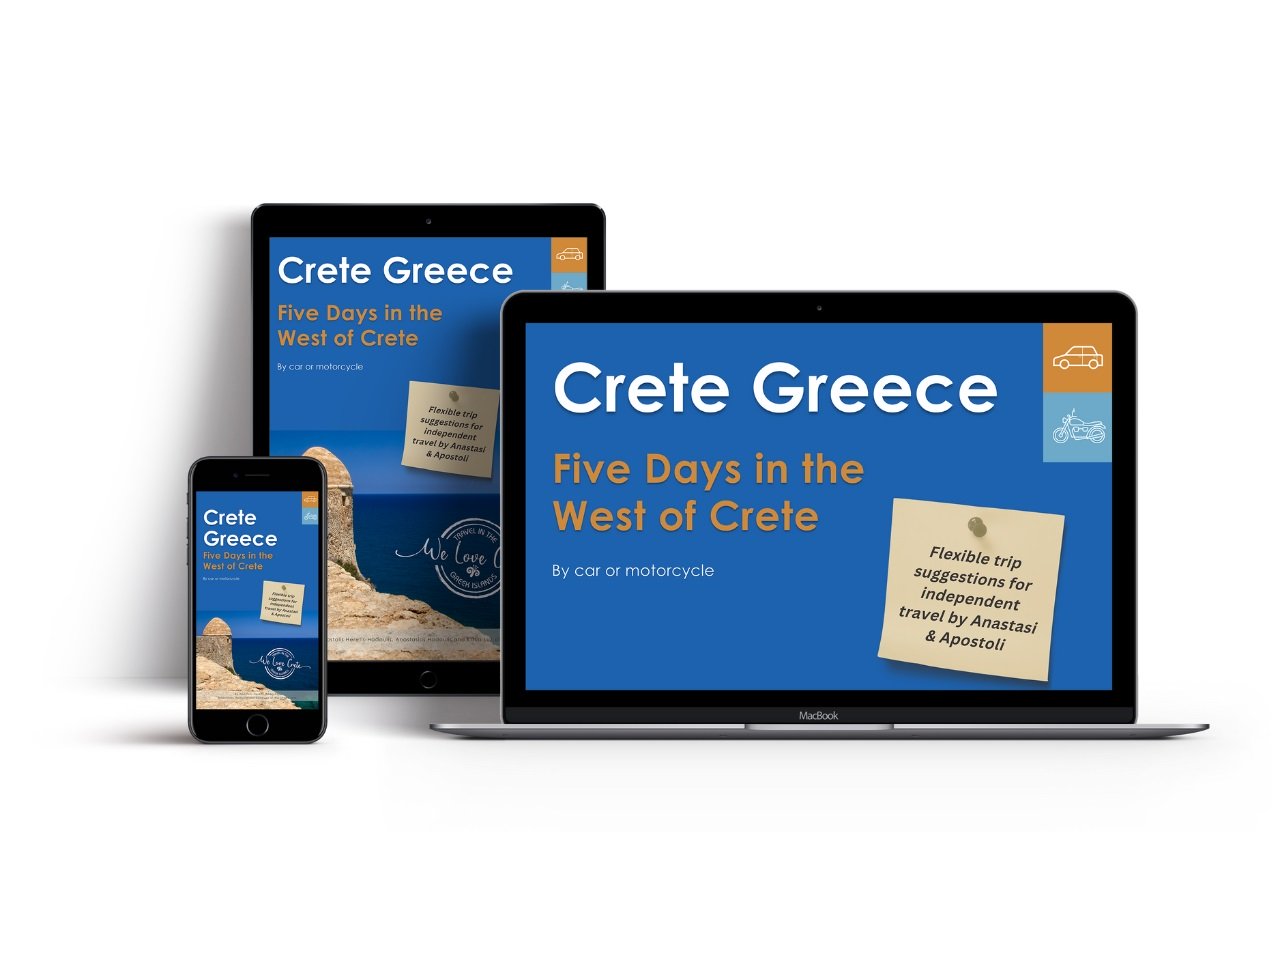 Crete Greece Trip Ideas - 5 Days in the West of Crete by Car or Motorcycle